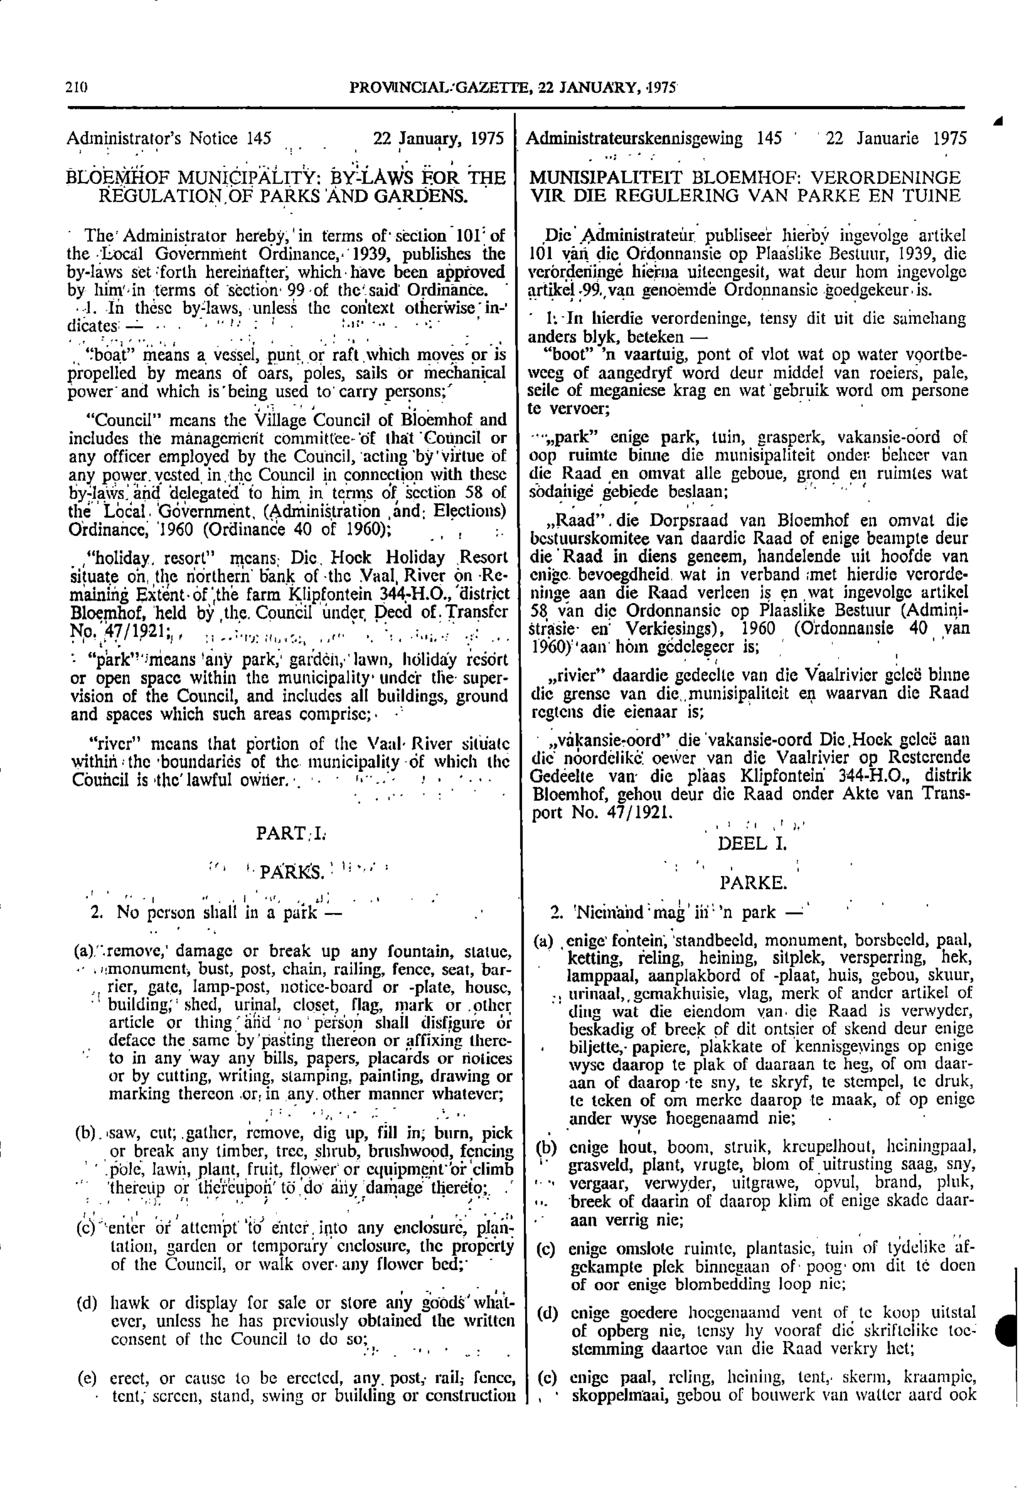 20 PROVNCAL: GAZETTE 22 JANUARY 975 Administrators Notice 45 22 January 975 Administratcurskennisgewing 45 22 Januarie 975 BLOEMHOF MUNCPALTY: BY = LAWS FOR THE REGULATONOF PARKS AND GARDENS